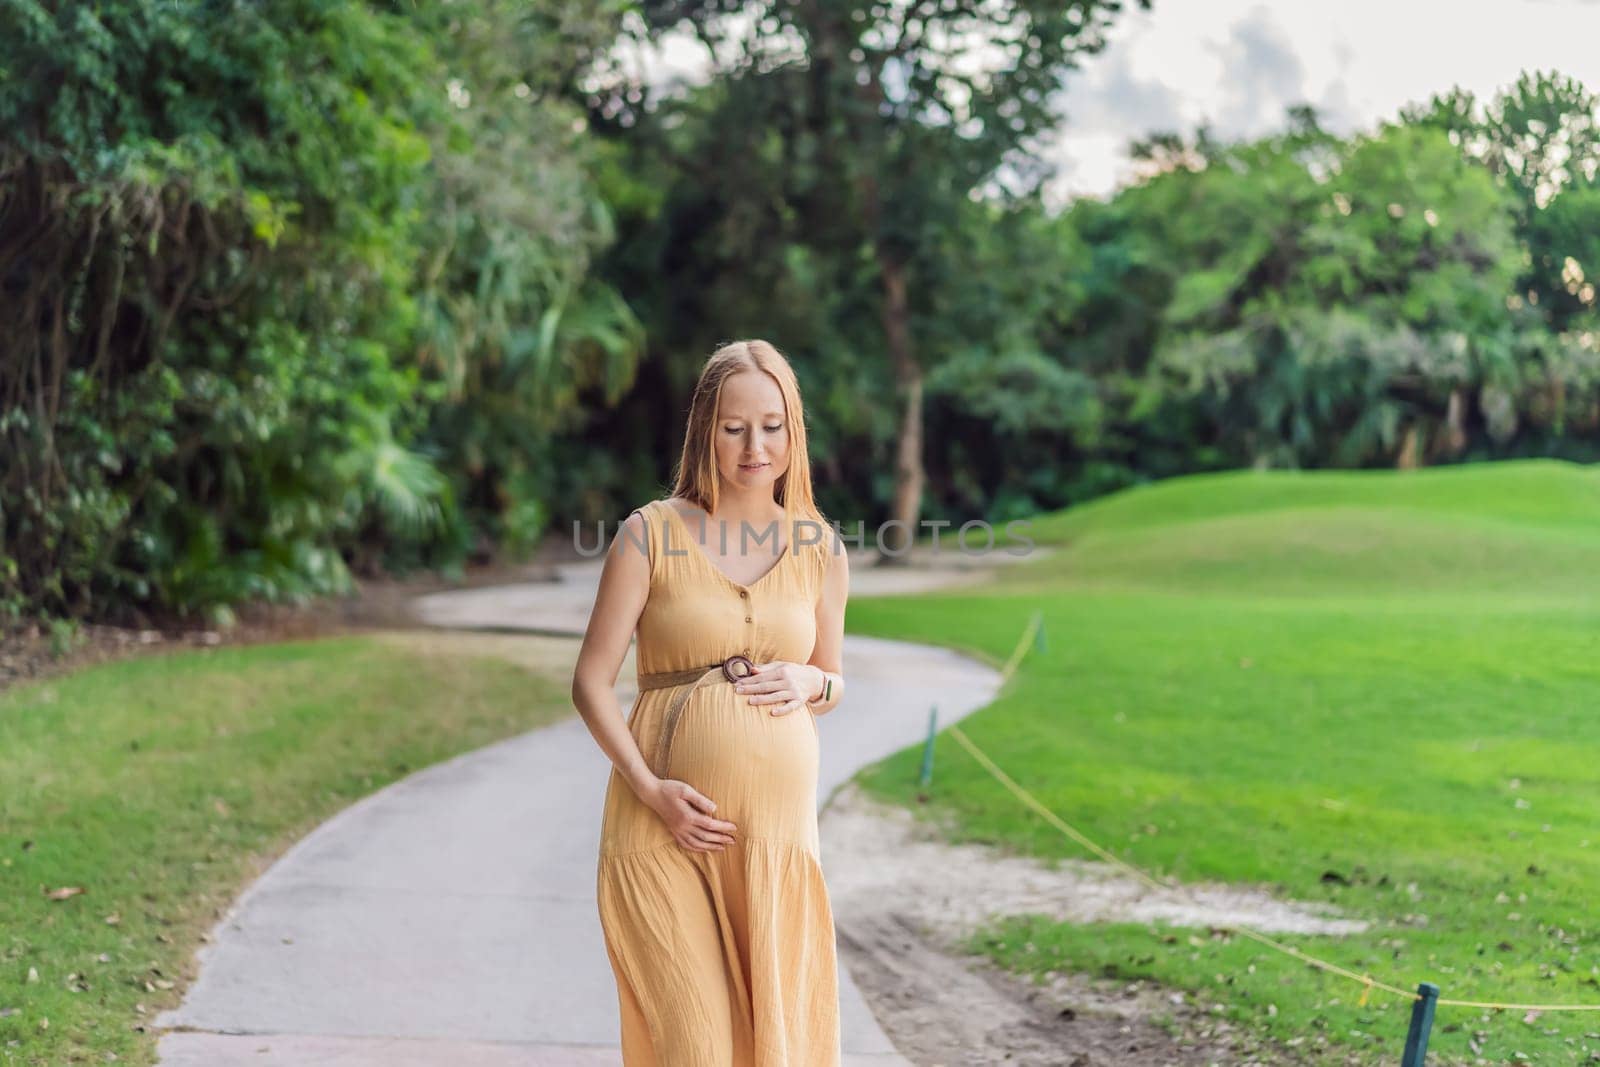 Tranquil scene as a pregnant woman enjoys peaceful moments in the park, embracing nature's serenity and finding comfort during her pregnancy.